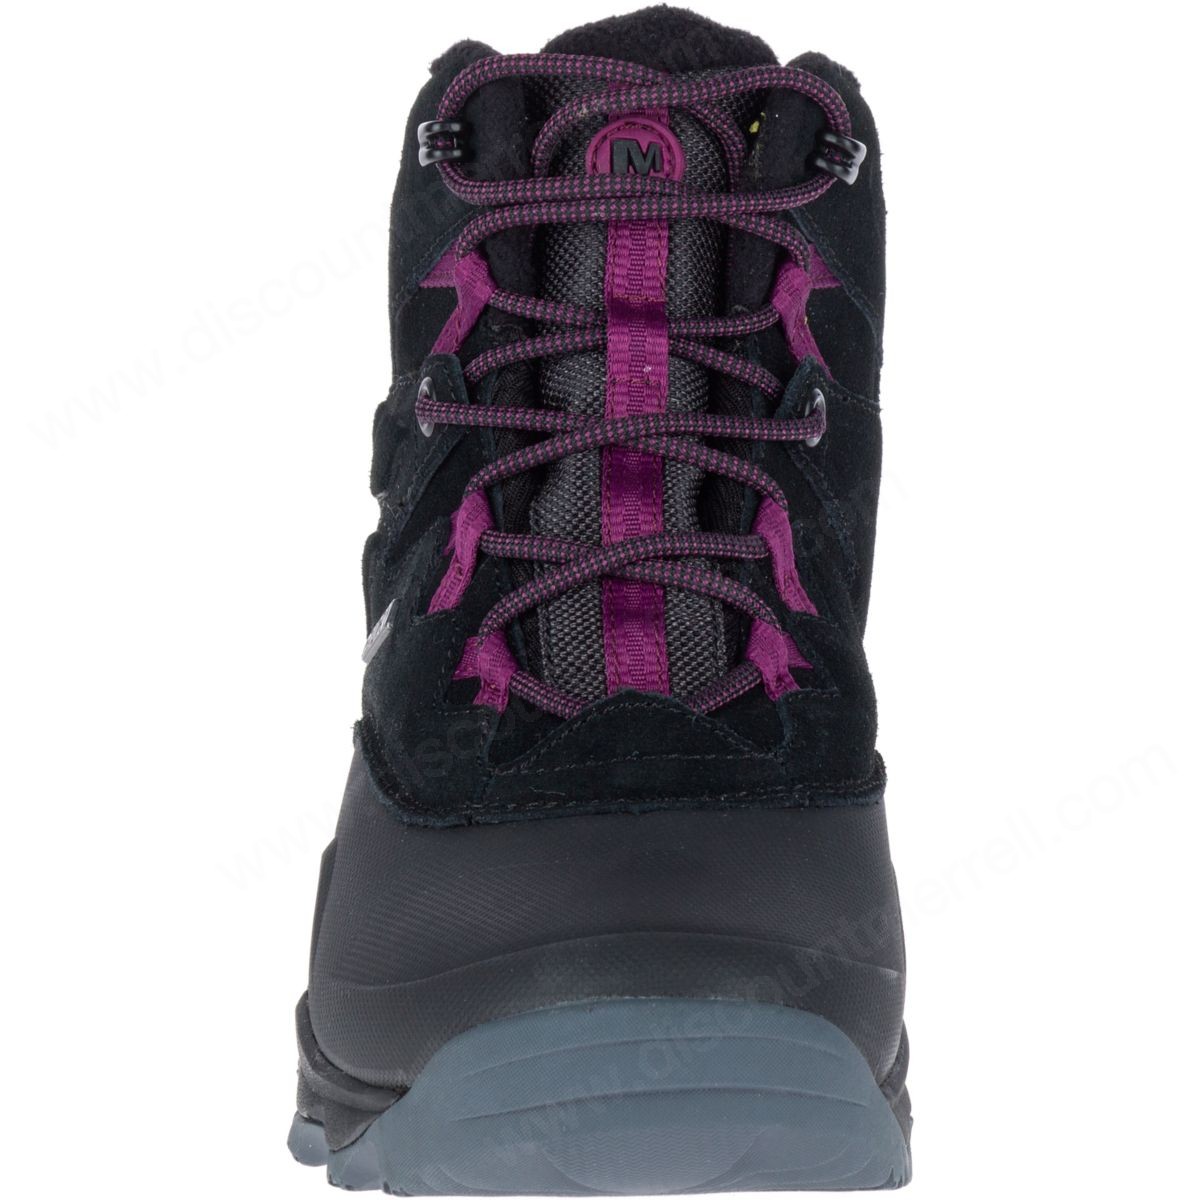 Merrell Lady's Thermo Shiver " Waterproof Black - -4